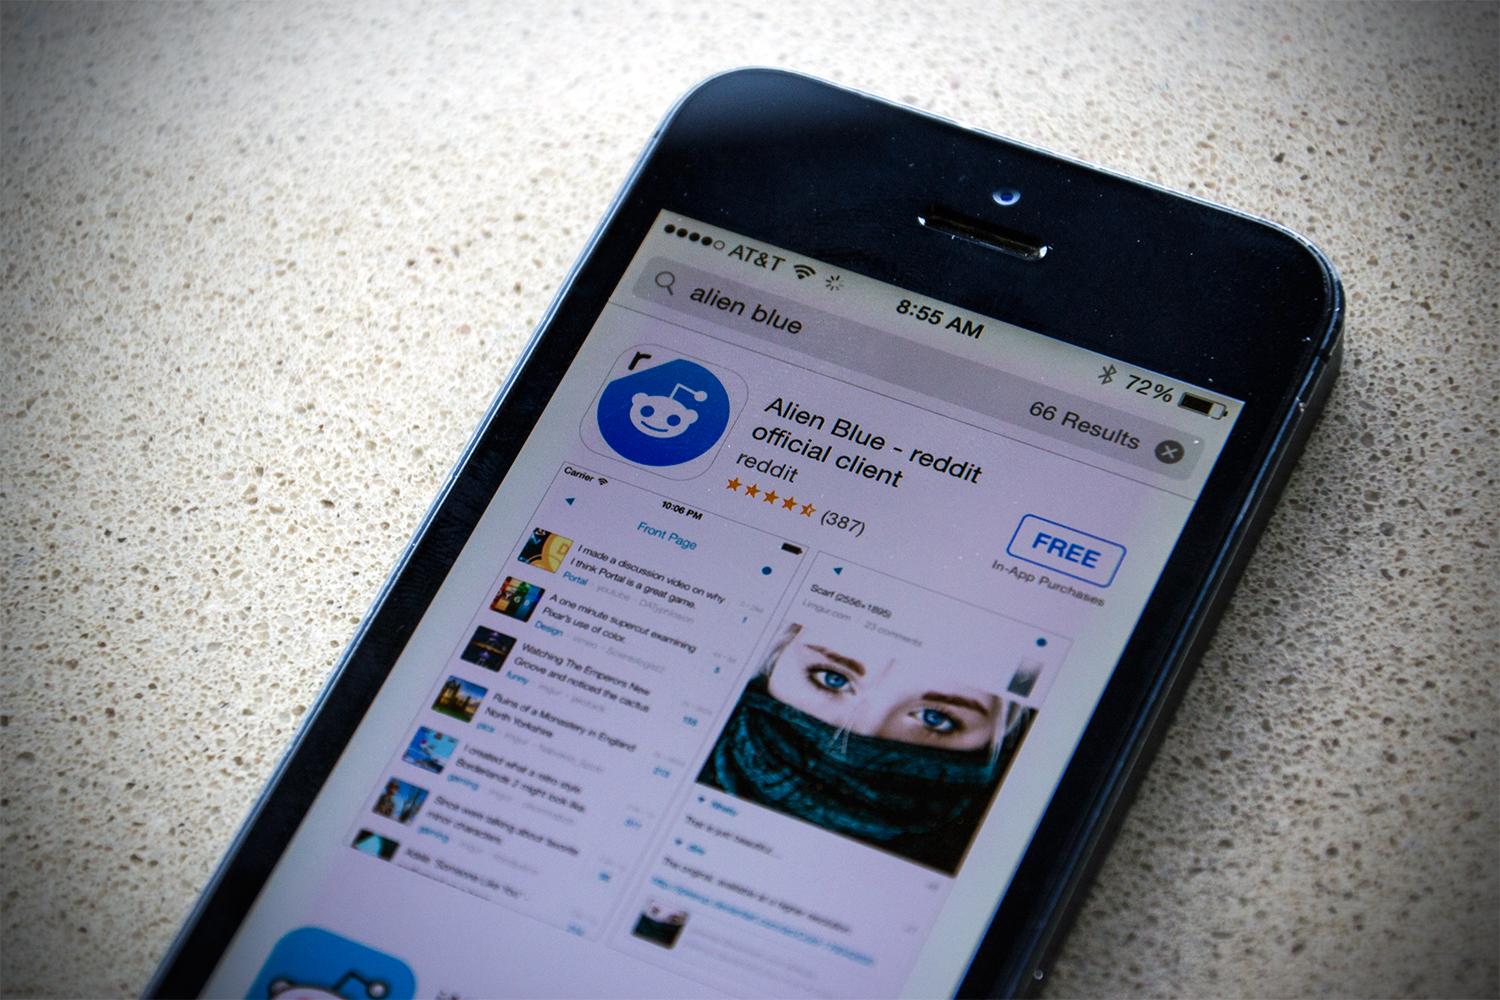 23 best free iPhone apps, according to Reddit